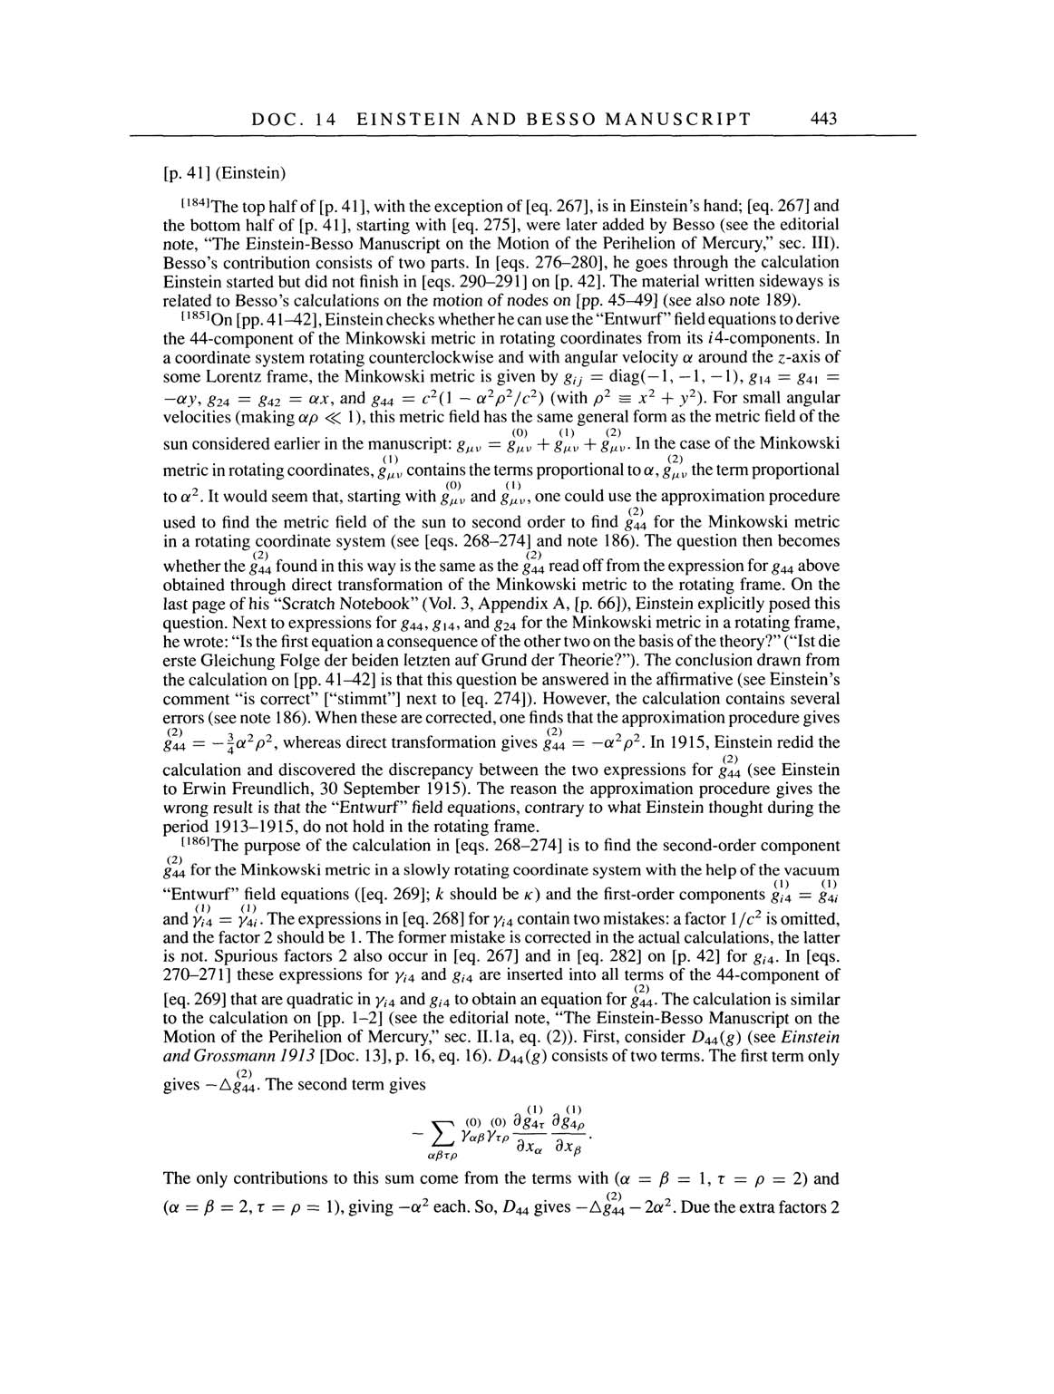 Volume 4: The Swiss Years: Writings 1912-1914 page 443